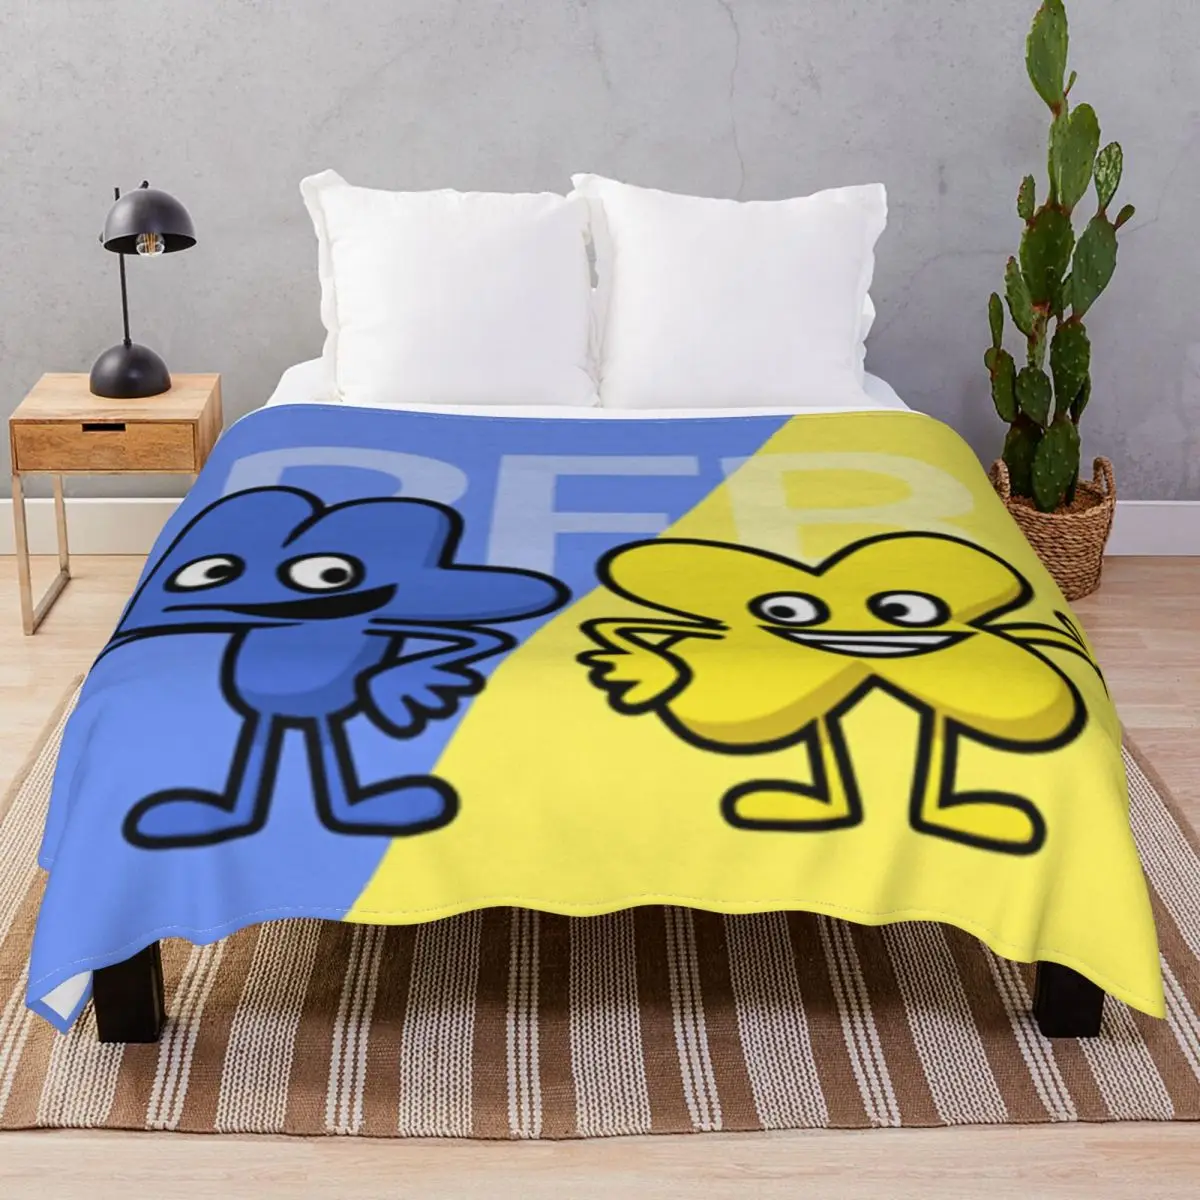 BFB 4 And X Design Blanket Flannel Plush Print Warm Throw Blankets for Bed Sofa Camp Office